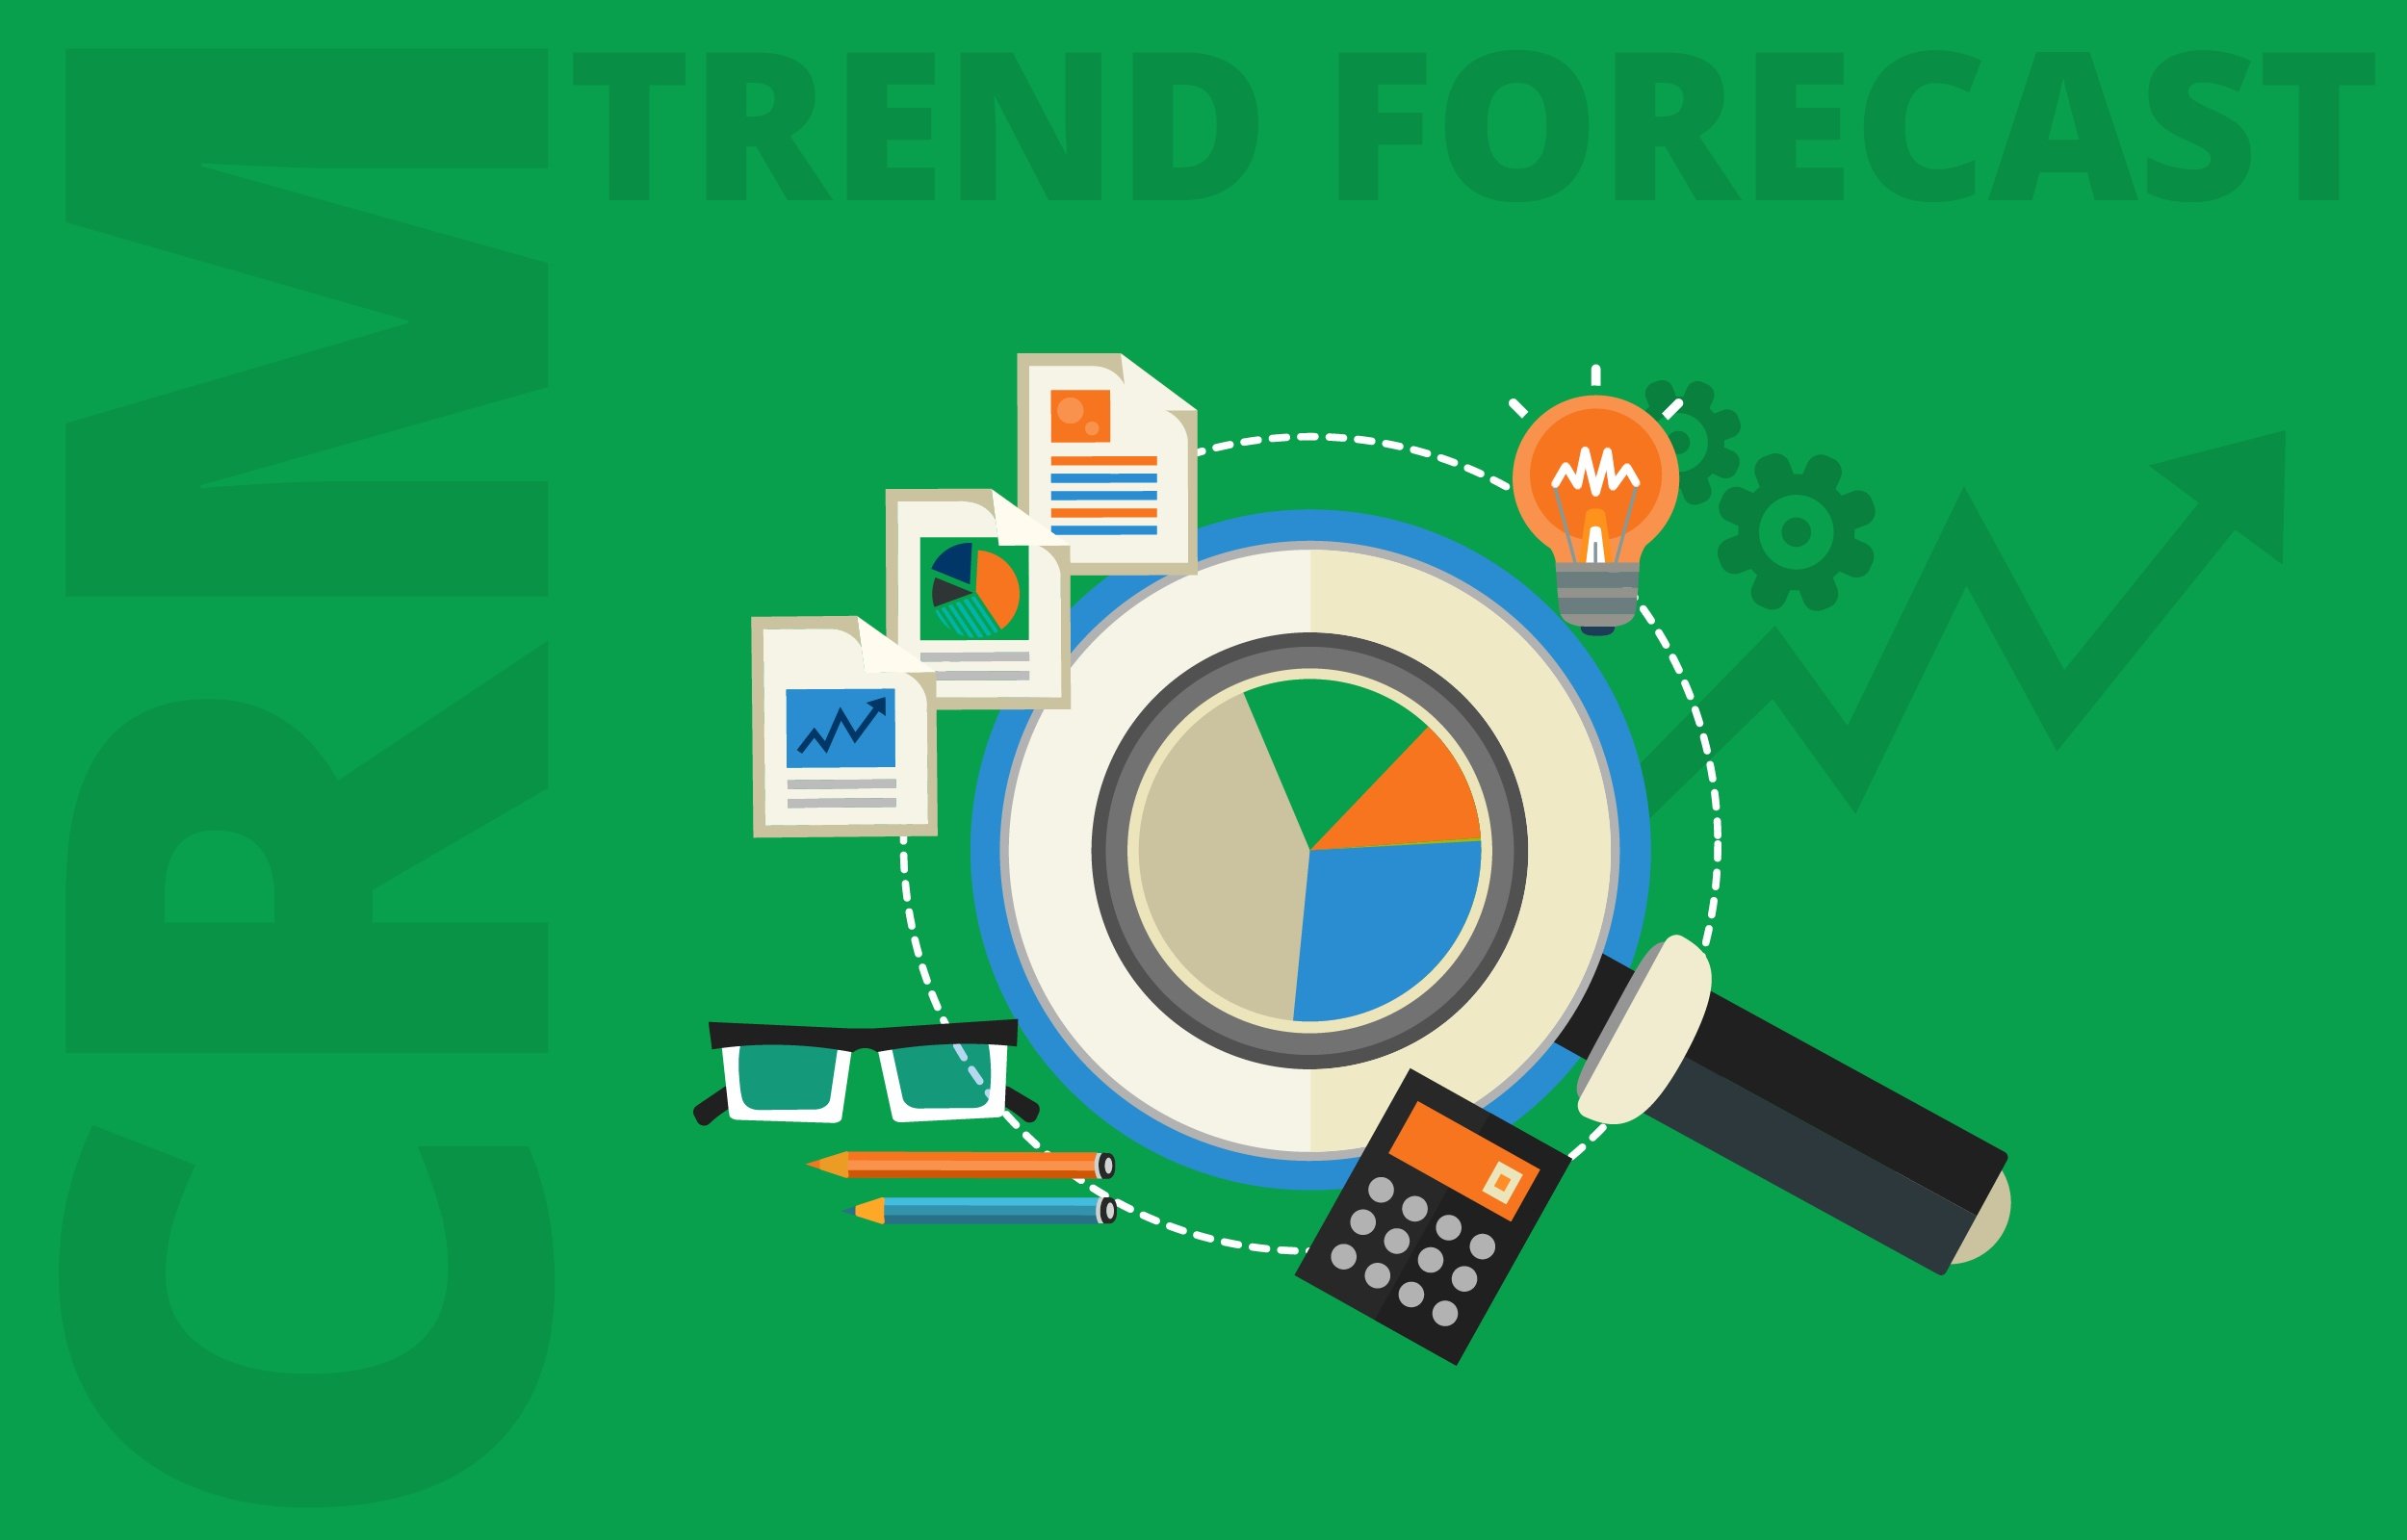 Key Statistics for Salesforce CRM for Trend Forecasting in 2019